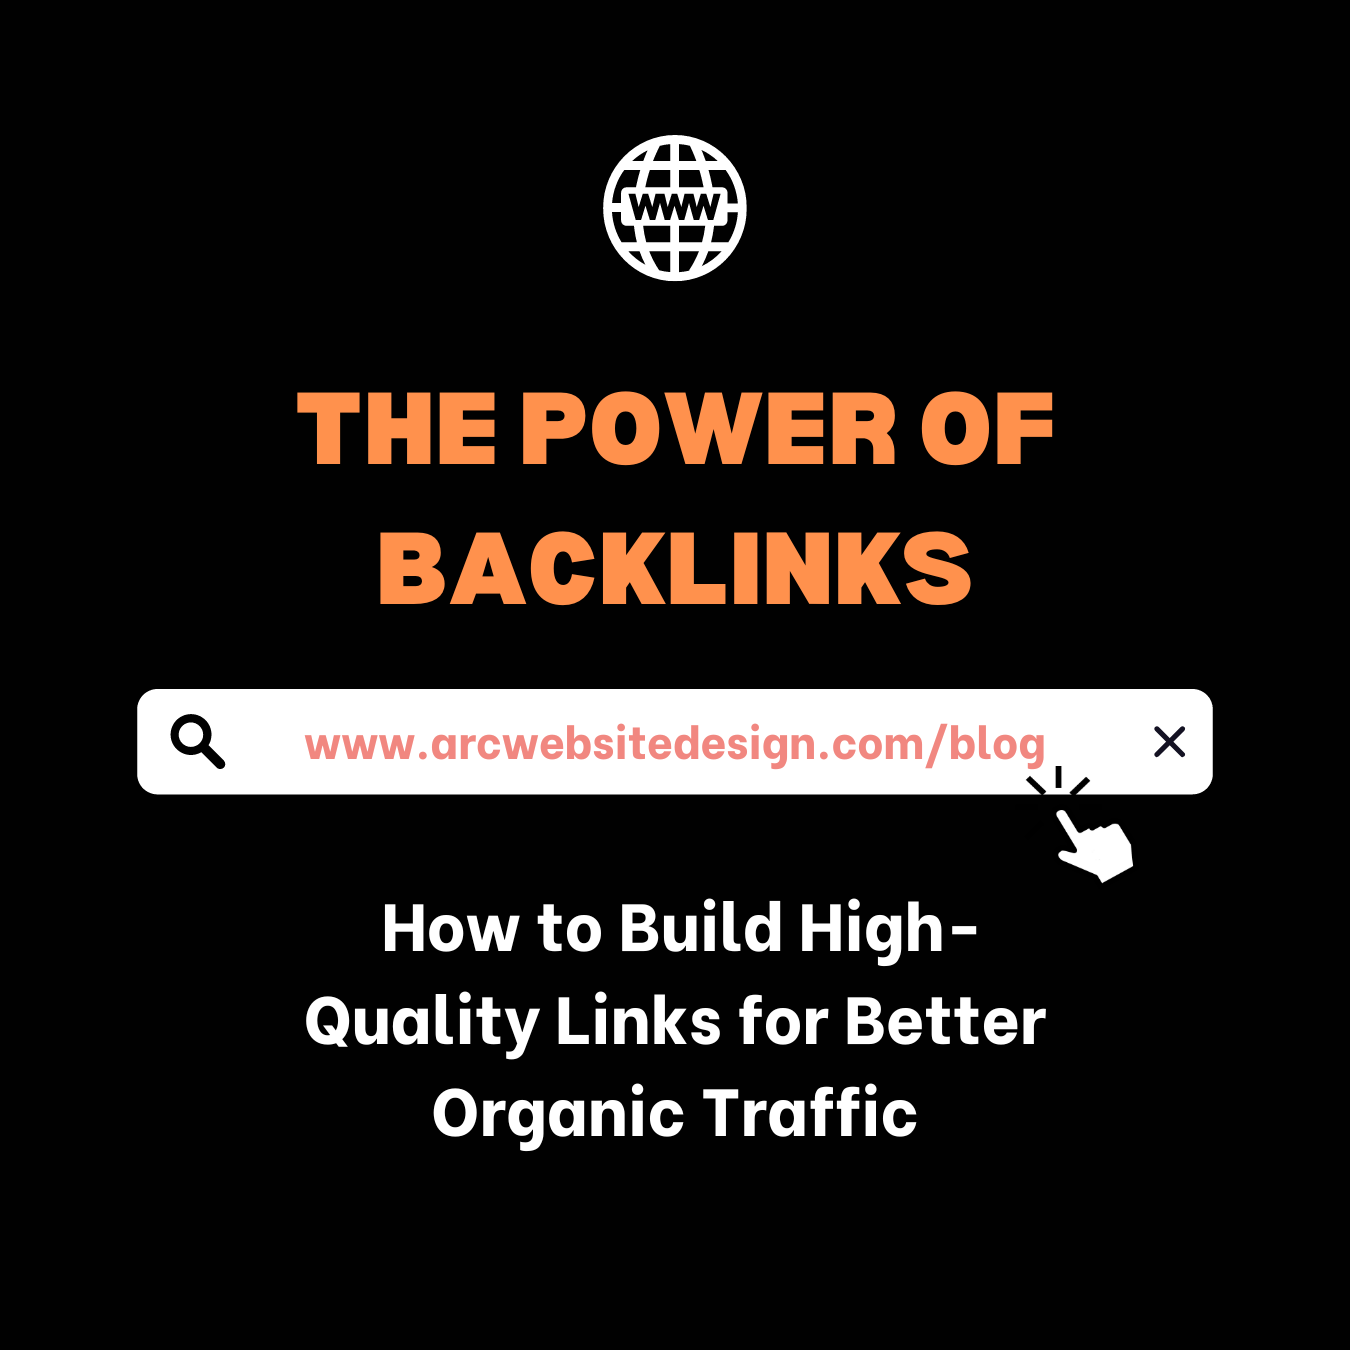 How to Build High-Quality Links for Better Organic Traffic